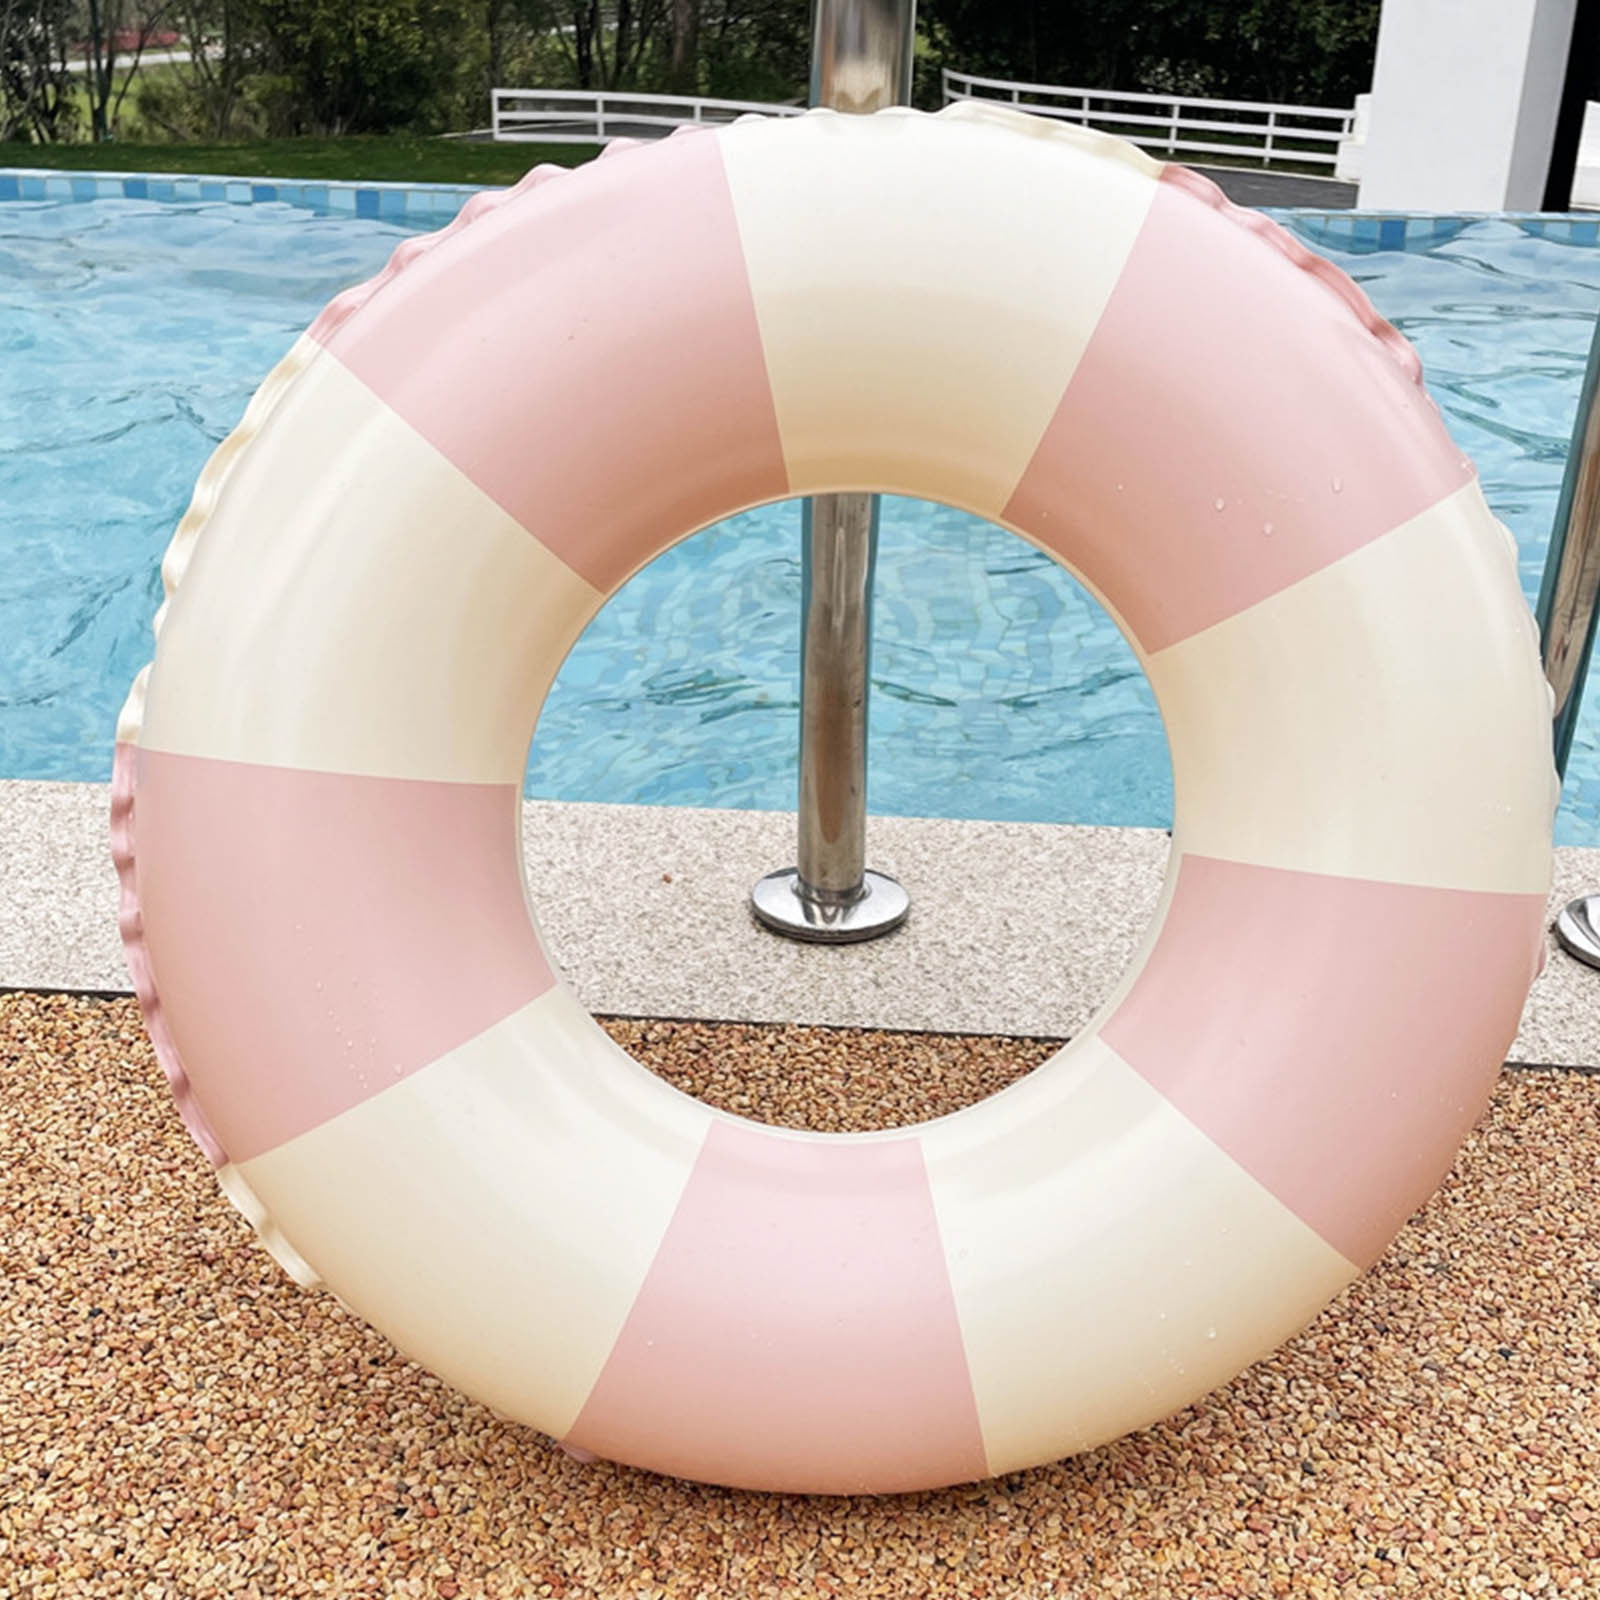 Built-in Feather Design Swimming Ring Swim Rings for Kids & Adult Thickened PVC Inflatable Transparent Creative Pool Floats Tube for Summer Beach Party 